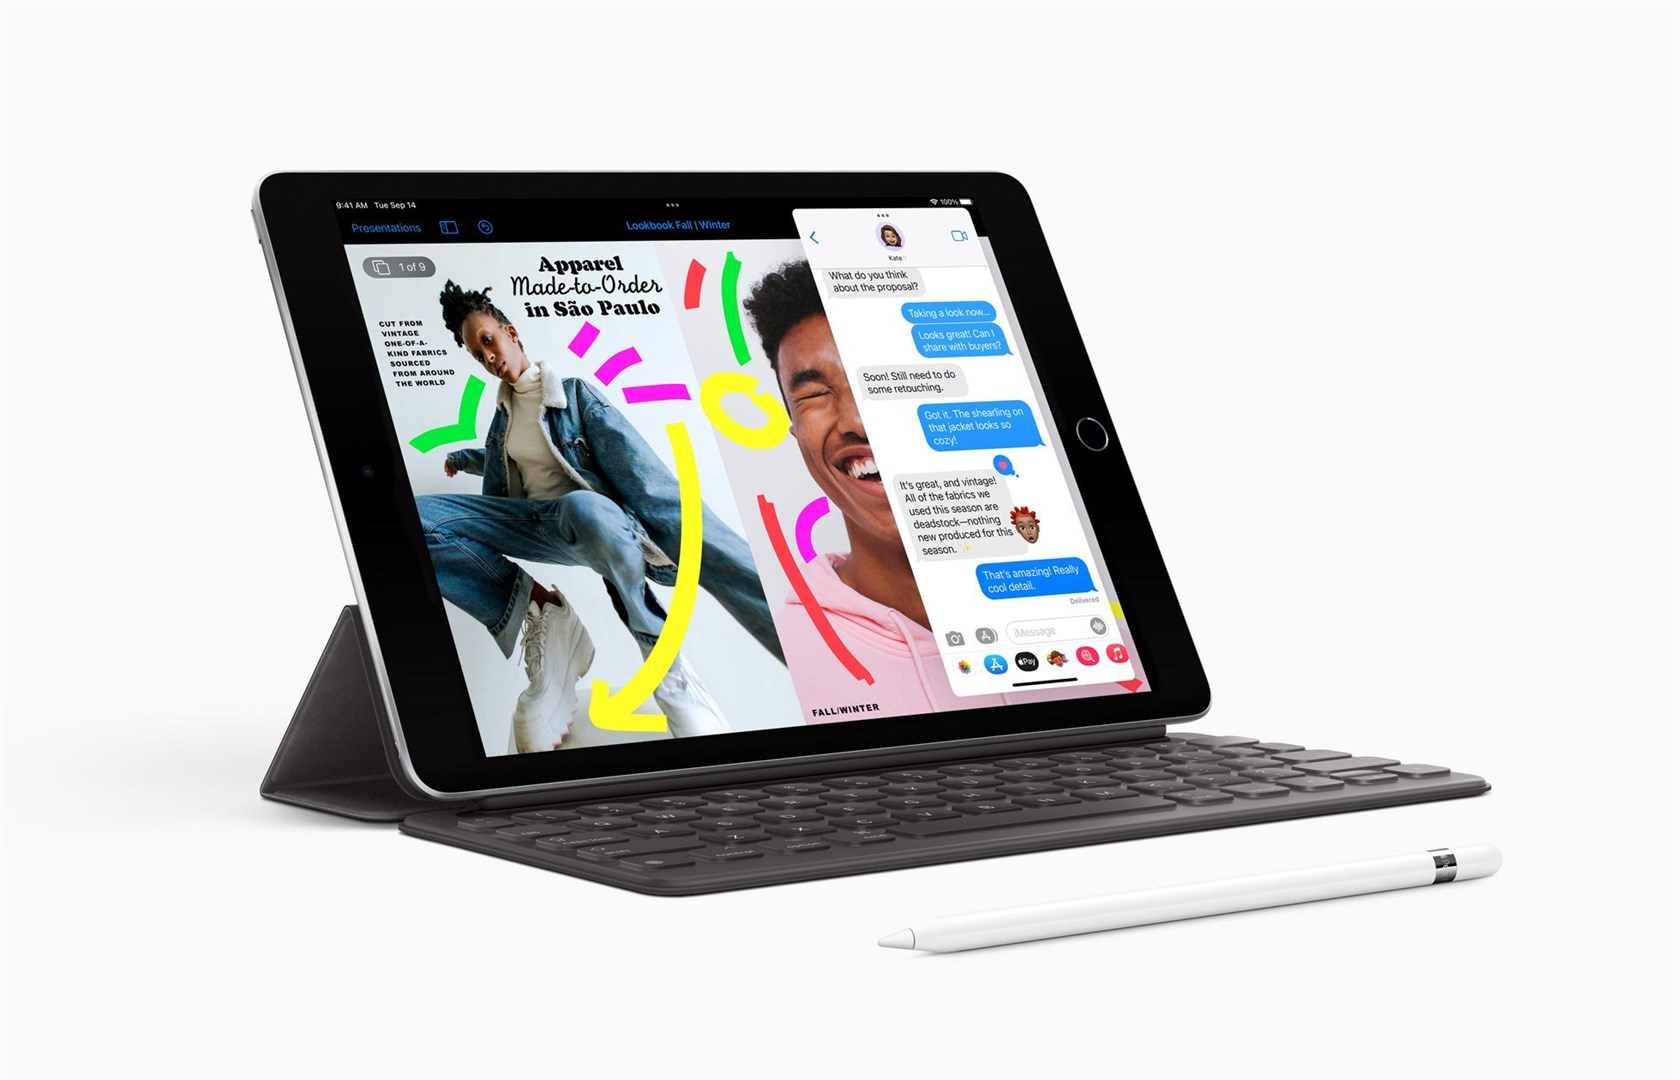 The new iPad has improved performance and cameras (Apple)